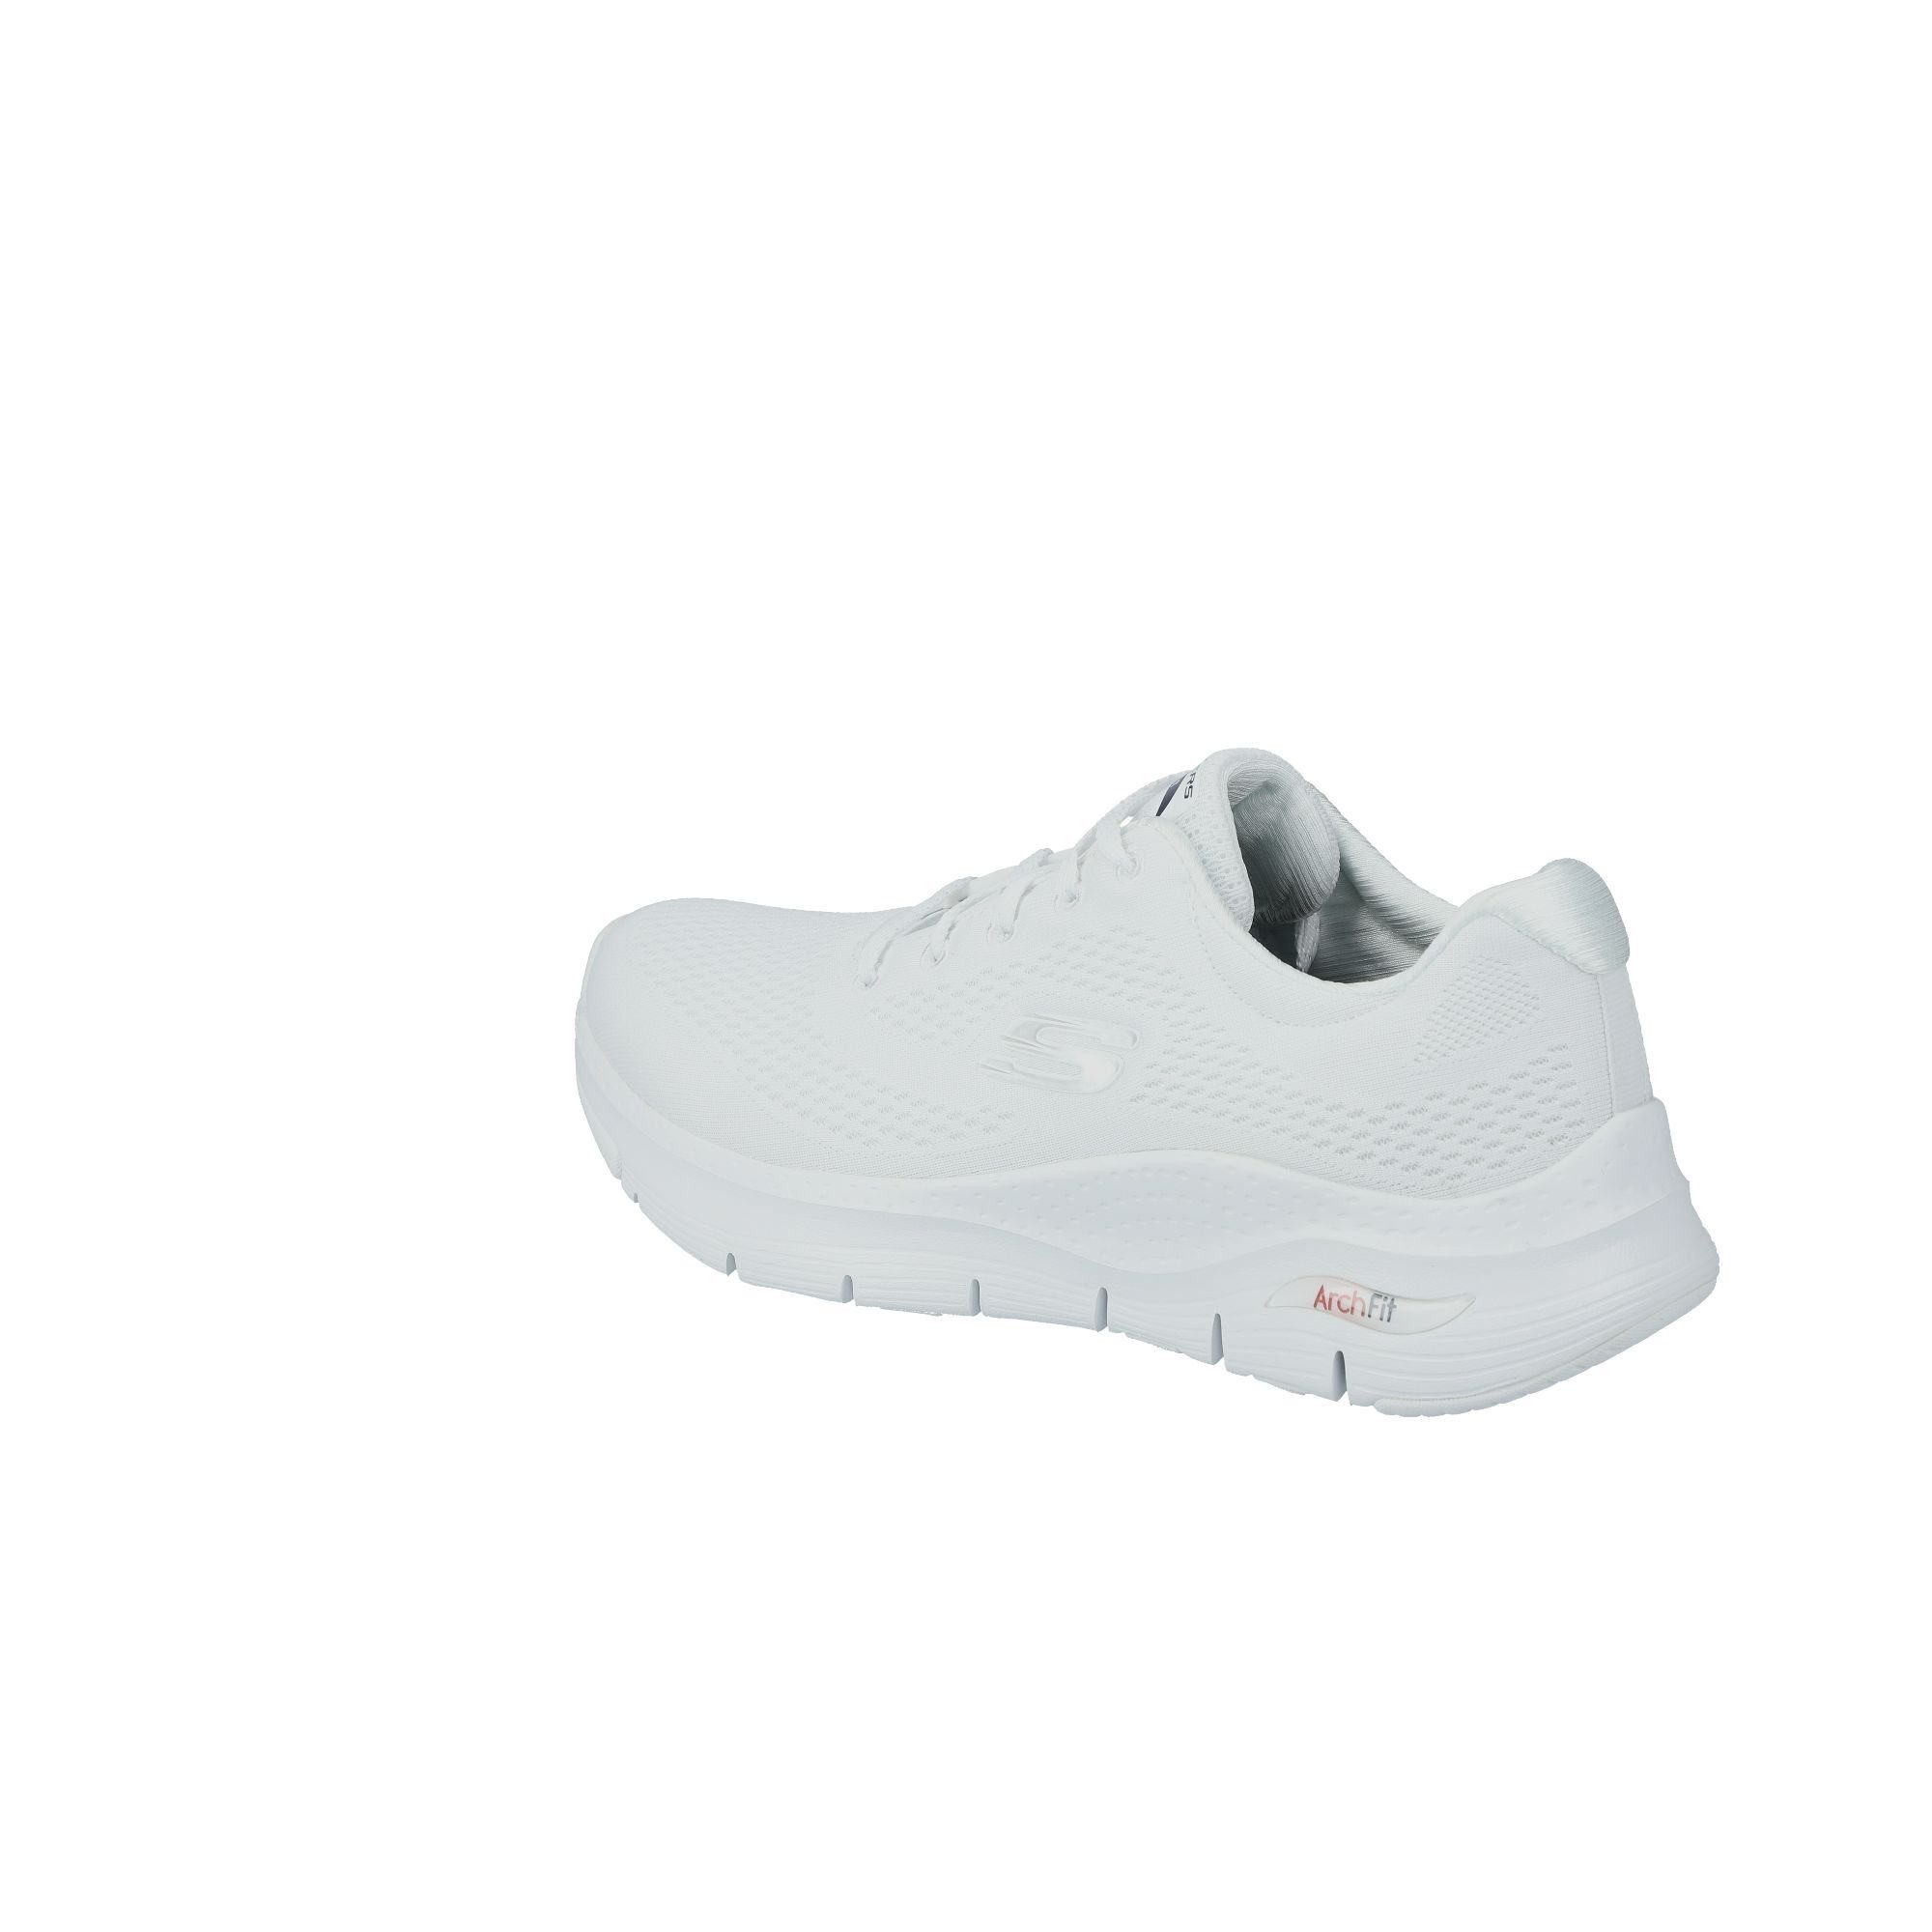 SKECHERS PERFORMANCE Skechers ARCH BIG APPEAL Sneaker white/navy/red FIT - (2-tlg)